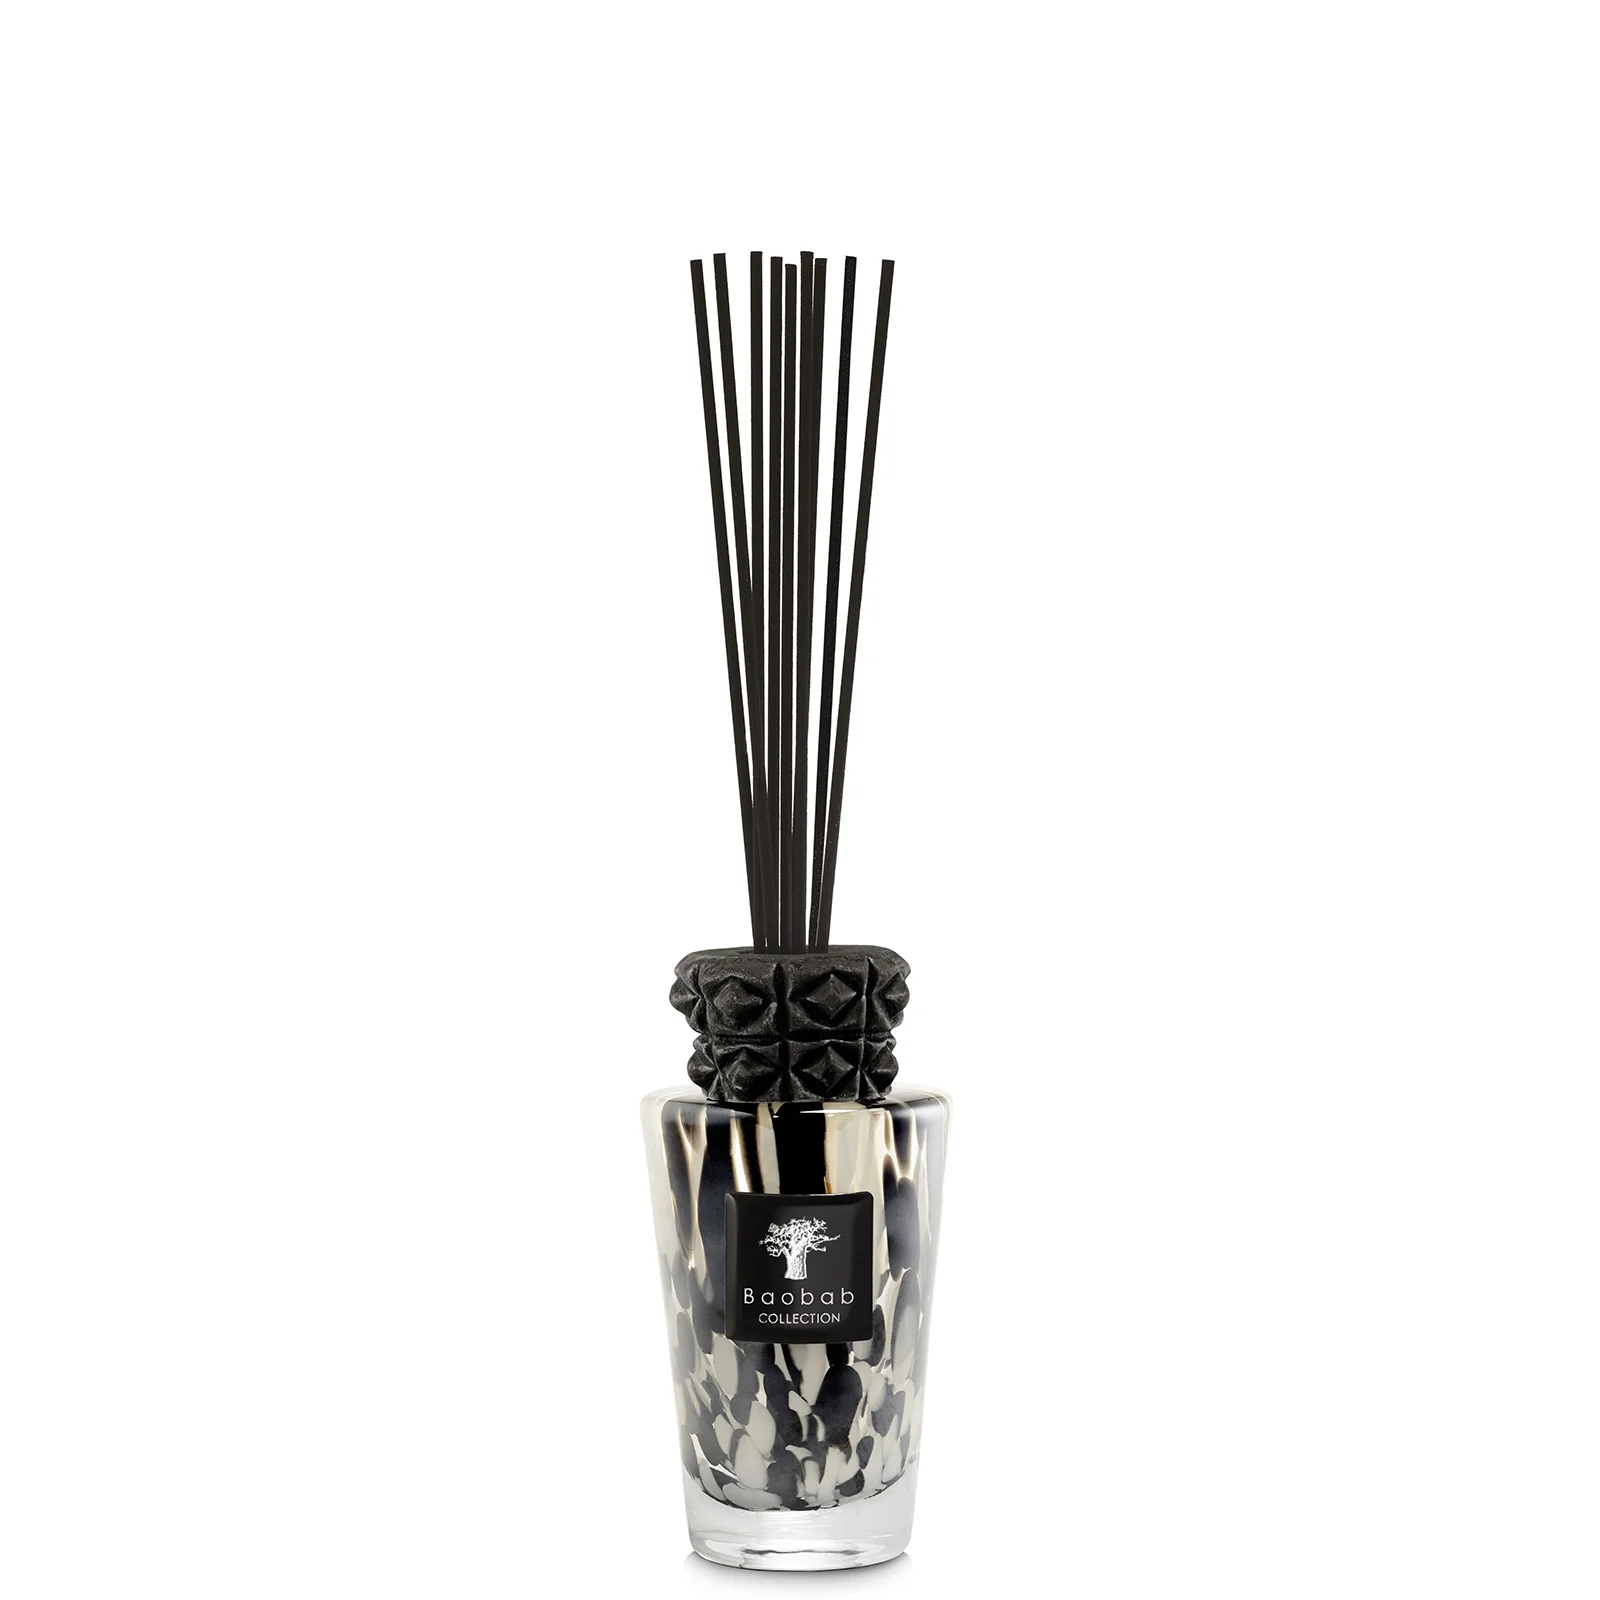 Baobab Collection Totem - Black Pearls Luxury Bottle Diffuser (Various Sizes) Image 1